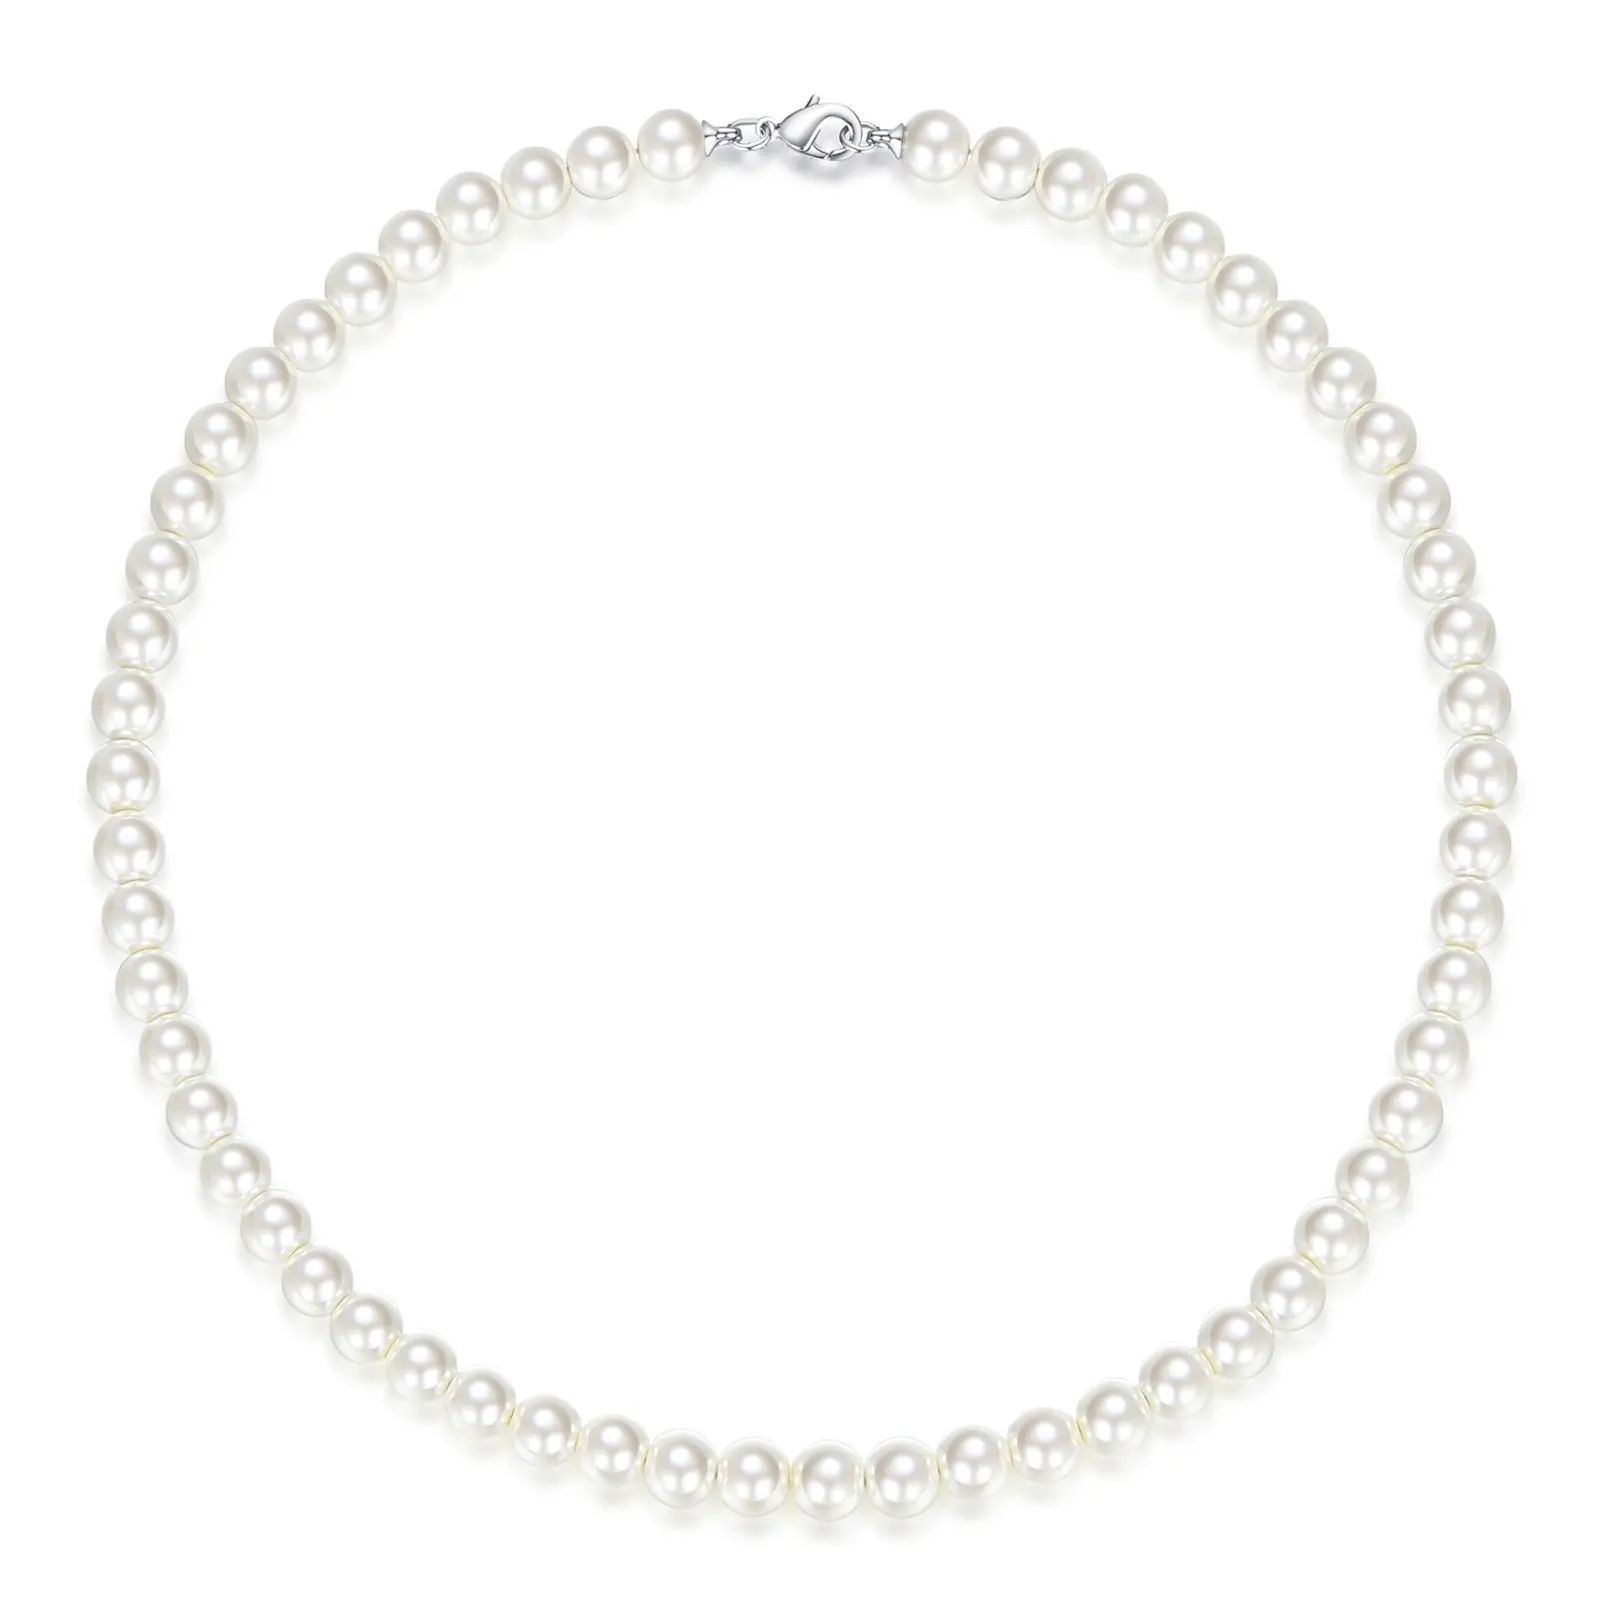 Classic Dainty Jewelry Lobster Clasp 8mm Round Shaped White Pearl Choker Necklace for Men or Women